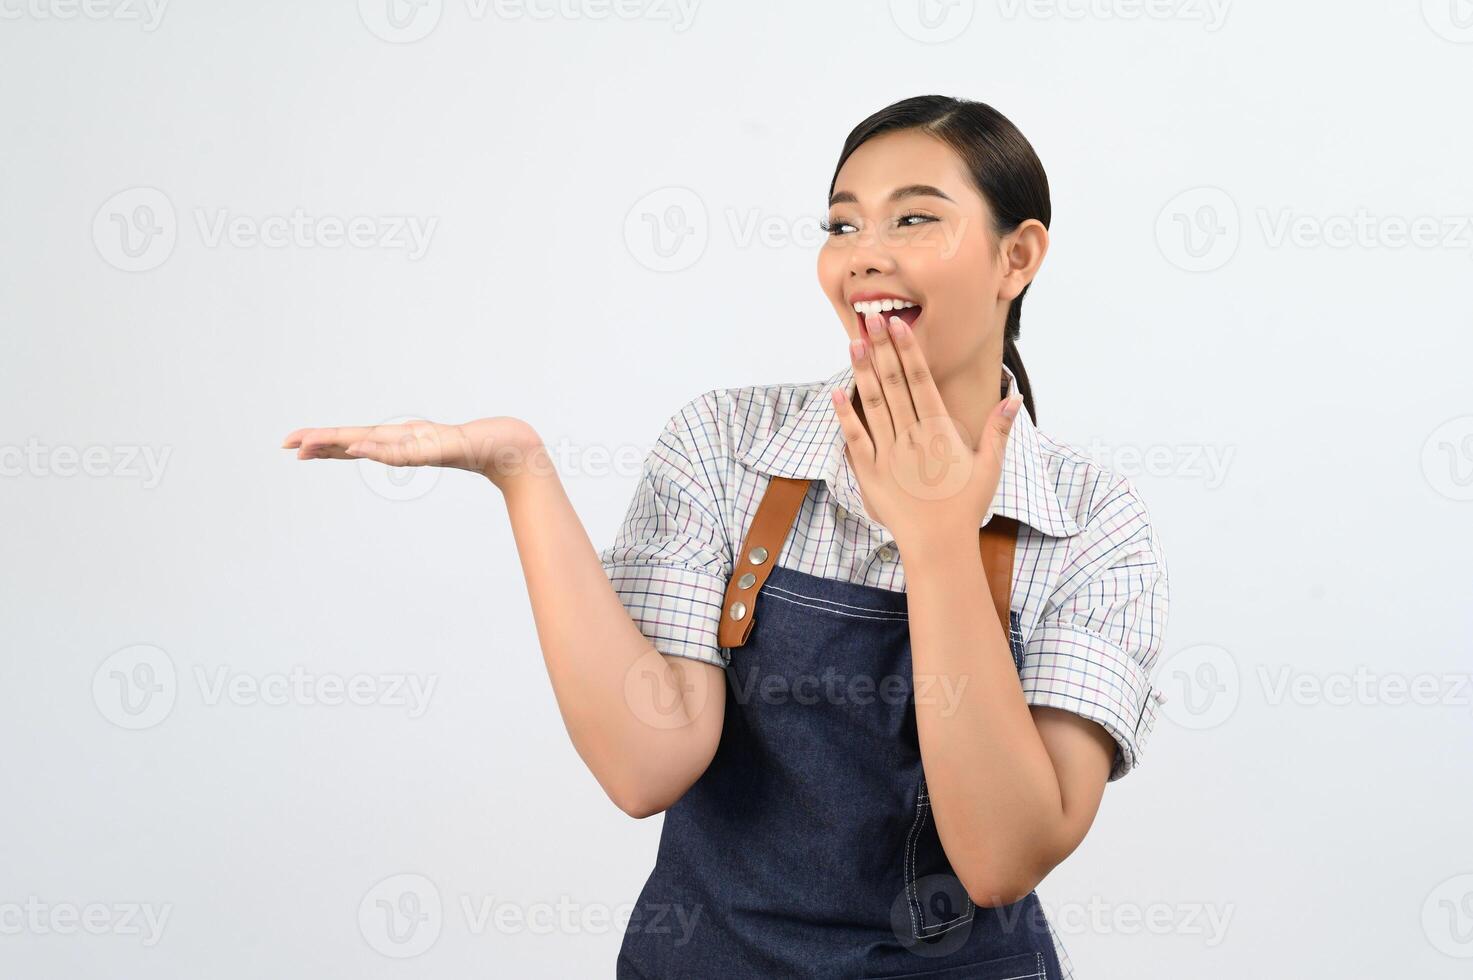 Portrait Asian young woman in waitress uniform with open palm posture photo